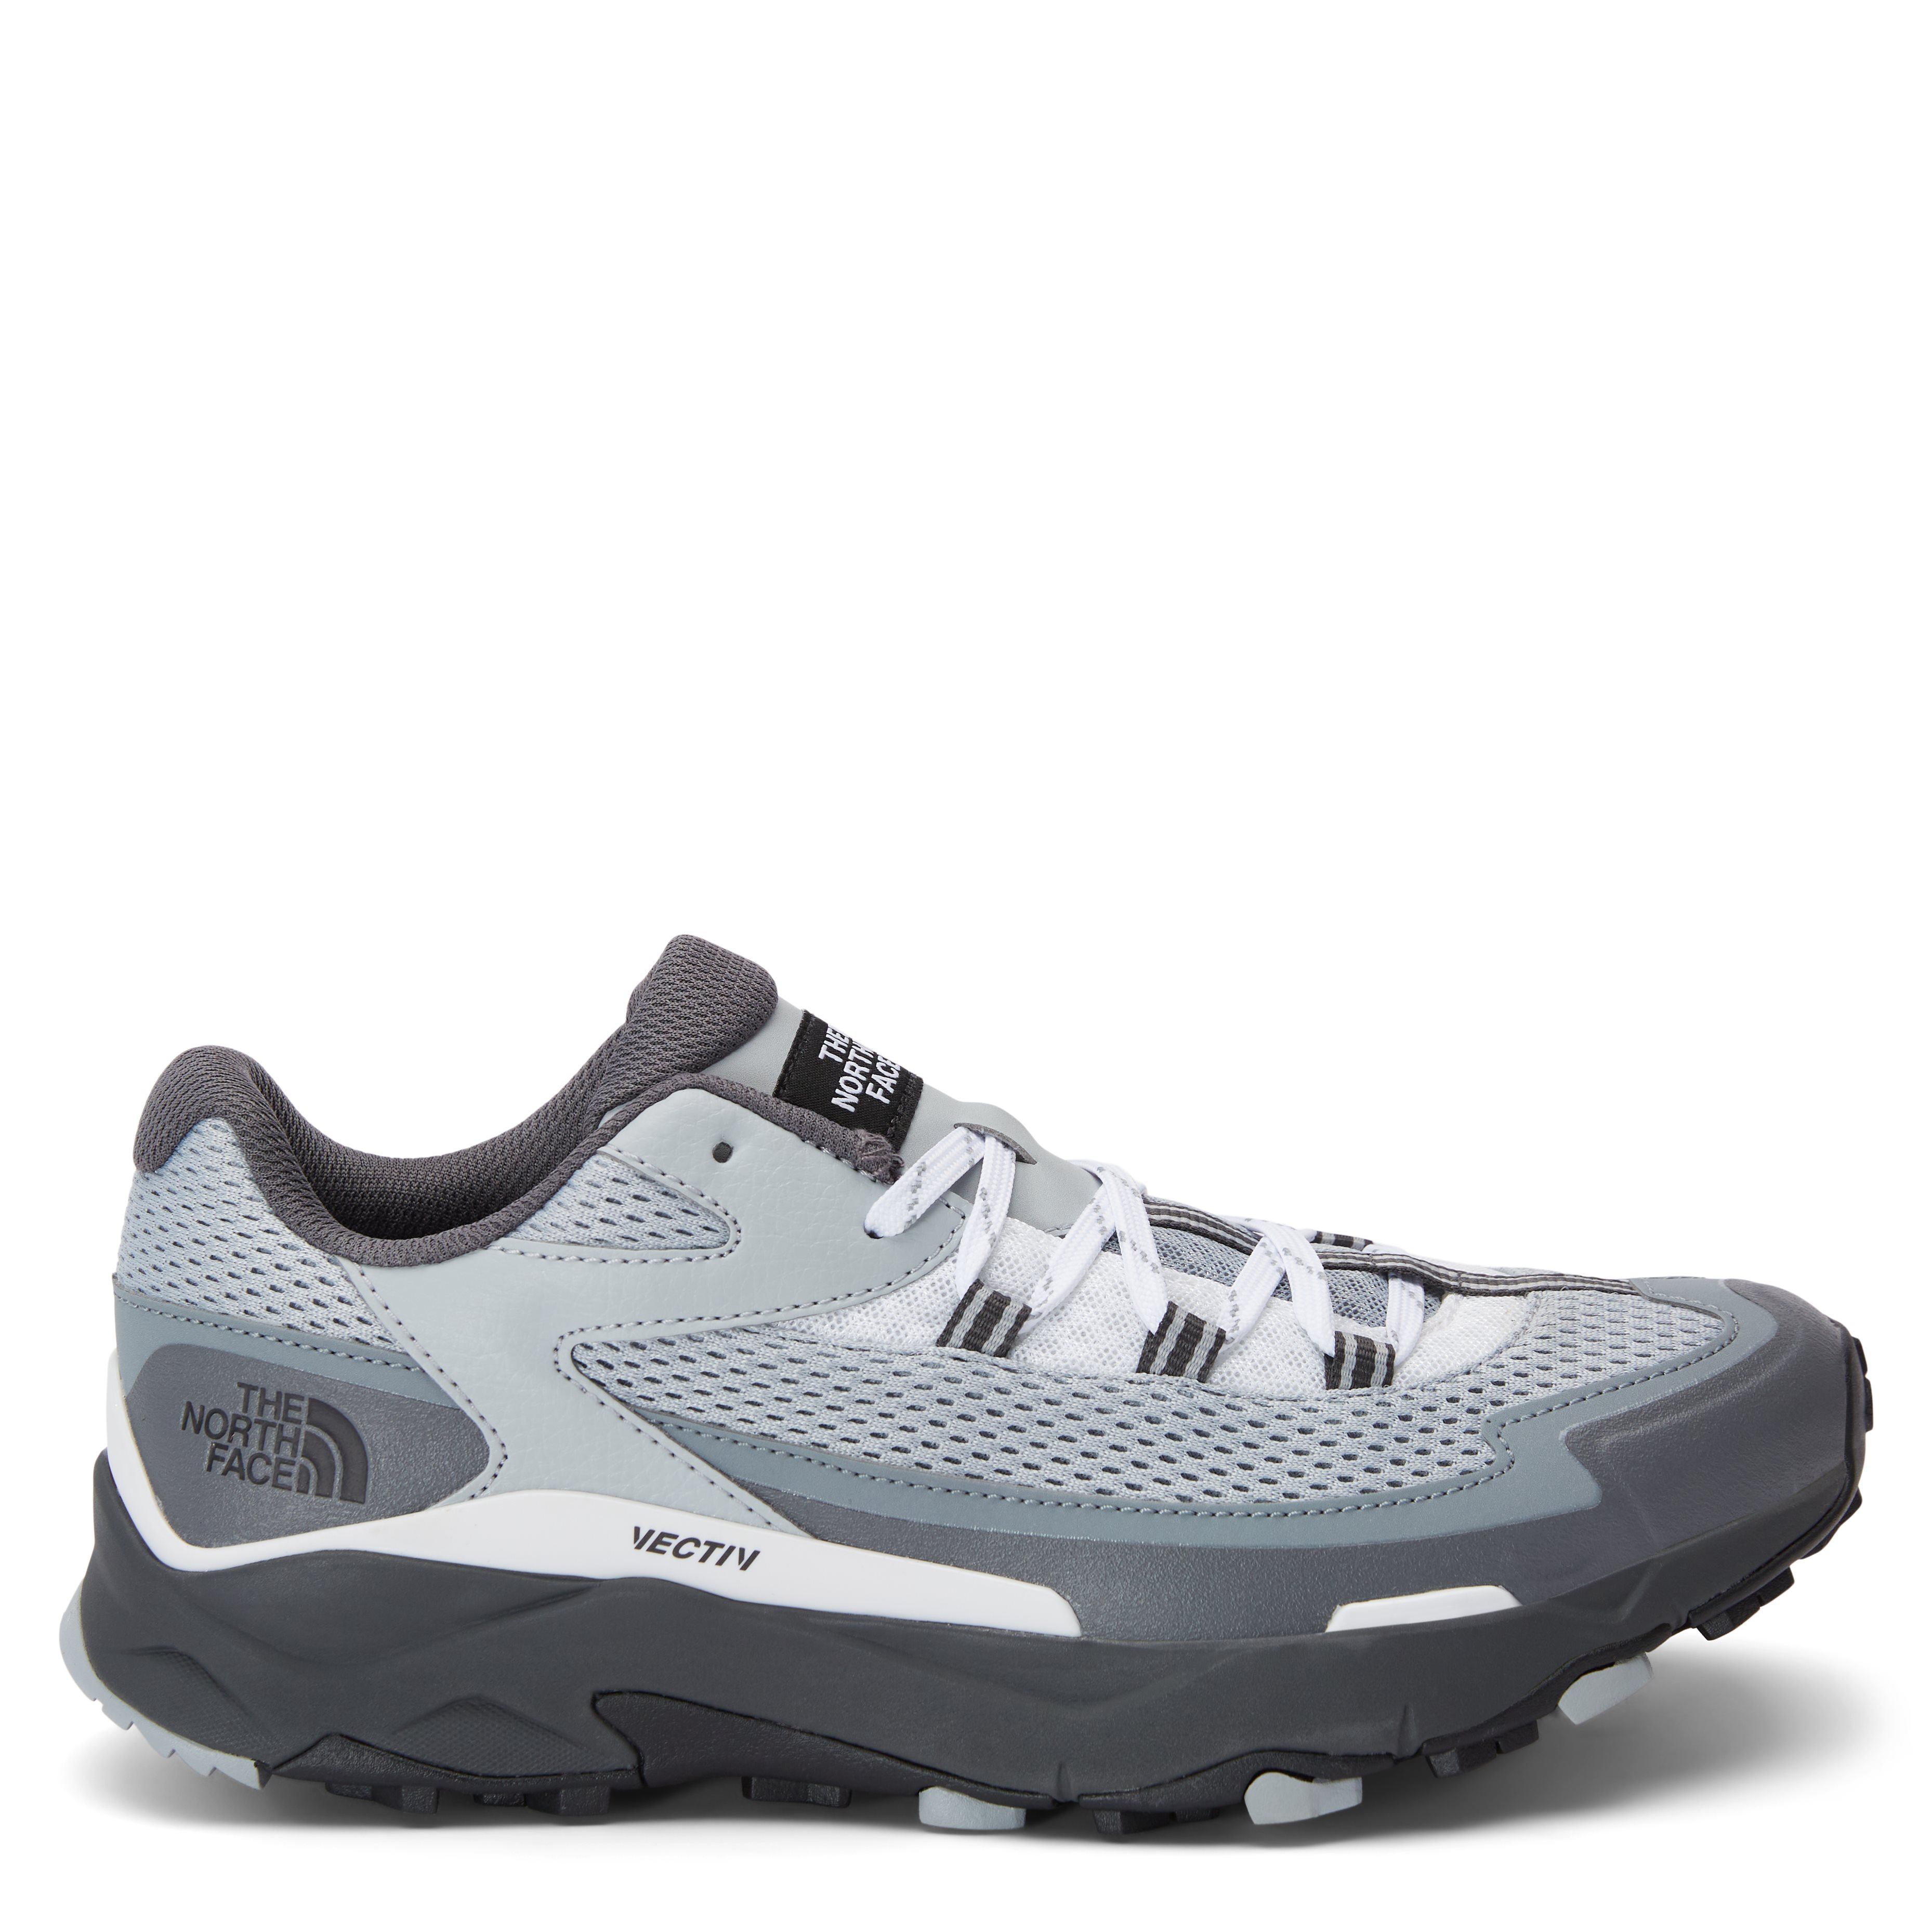 The North Face Shoes VECTIV TARAVAL NF0A52Q1 Grey